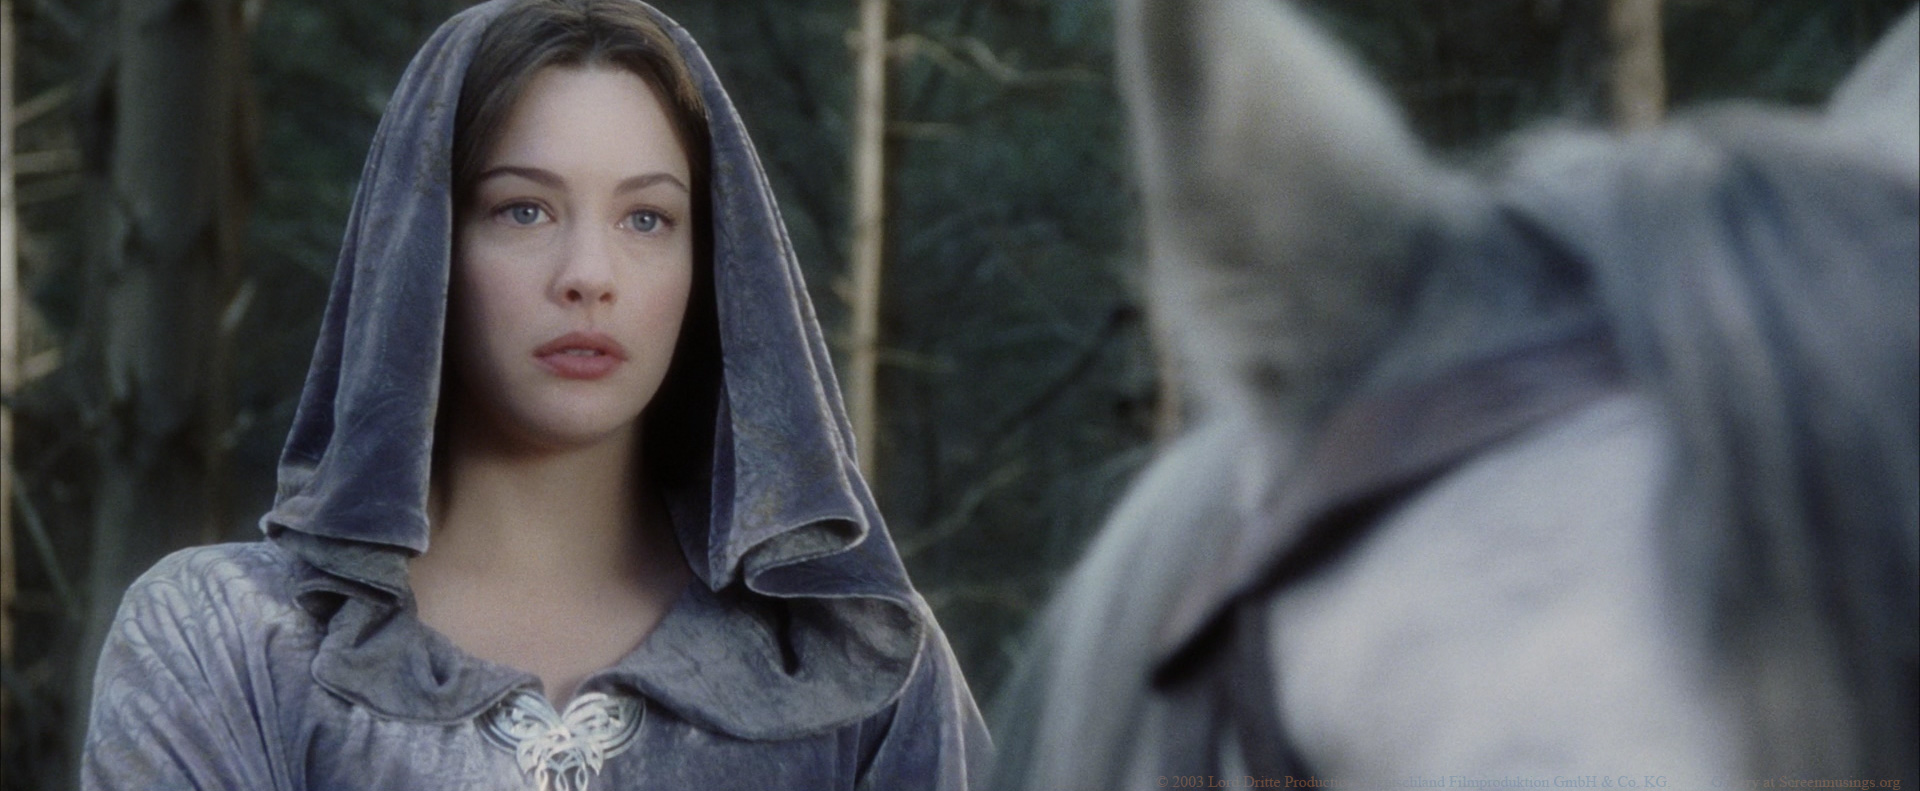 Liv Tyler in The Lord of the Rings: The Return of the King (2003) .